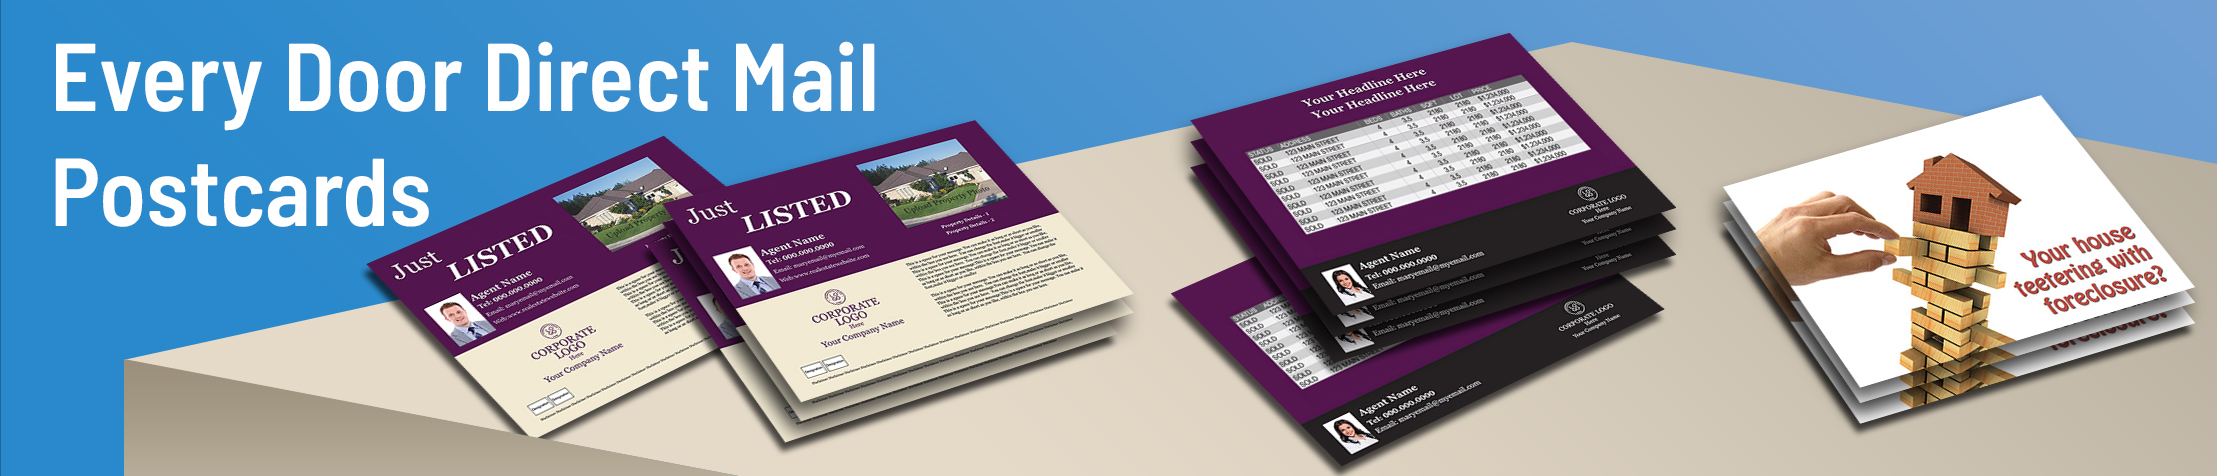 Berkshire Hathaway Real Estate   Every Day Direct Mail Postcards | Sparkprint.com